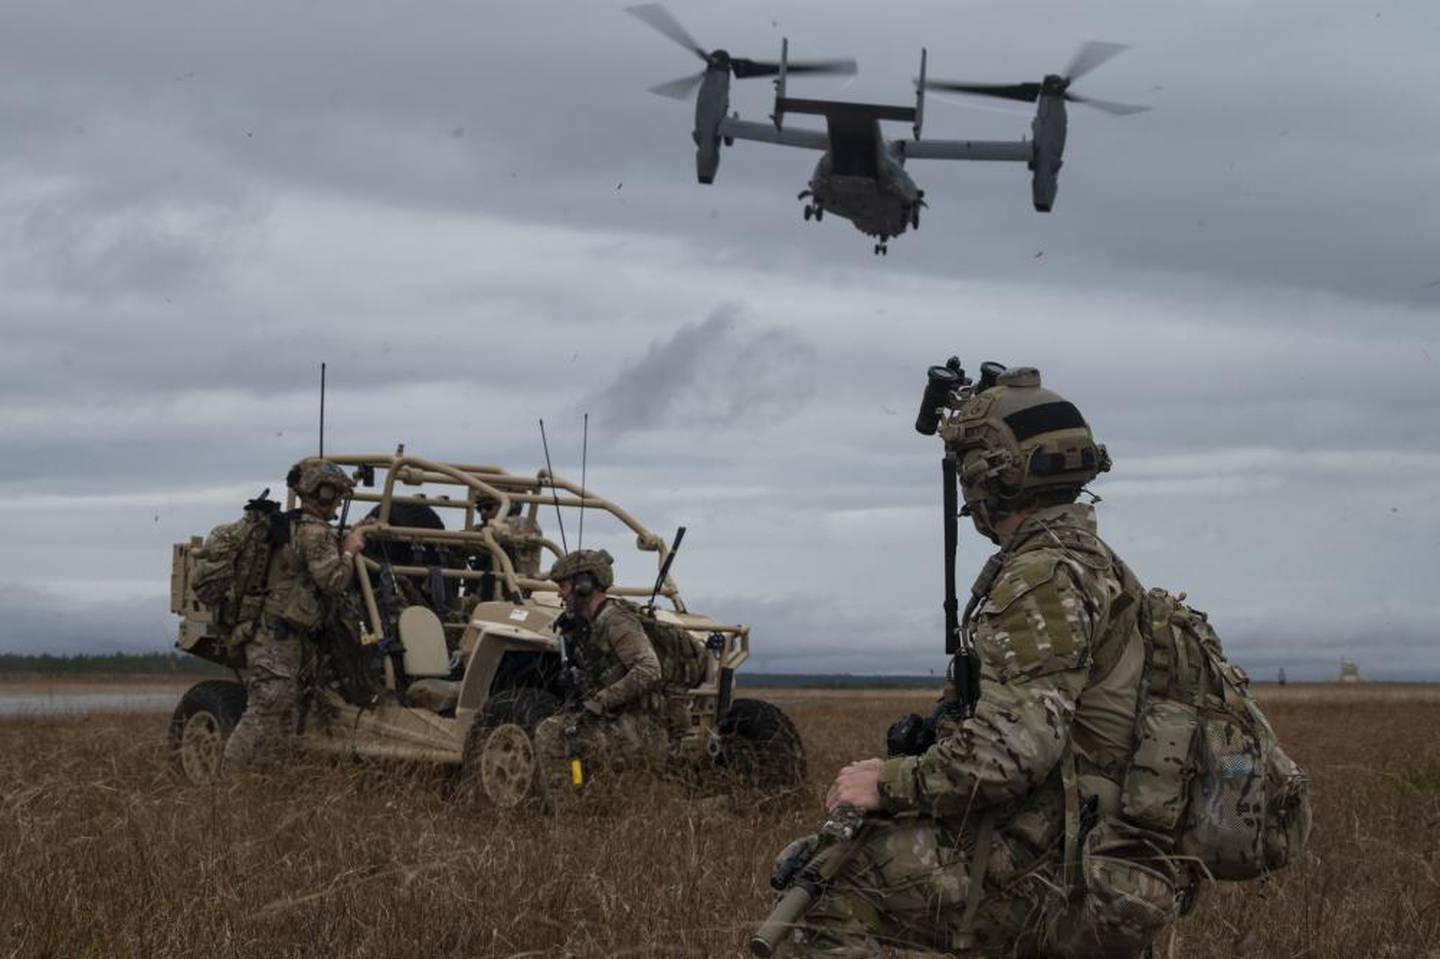 Special tactics operators assigned to the 23rd Special Tactics Squadron, watch a CV-22 Osprey tilt-rotor aircraft assigned to the 8th Special Operations Squadron, take off from the Eglin Range Complex, Florida, Dec. 8, 2021. (Tech. Sgt. Carly Kavish/Air Force)